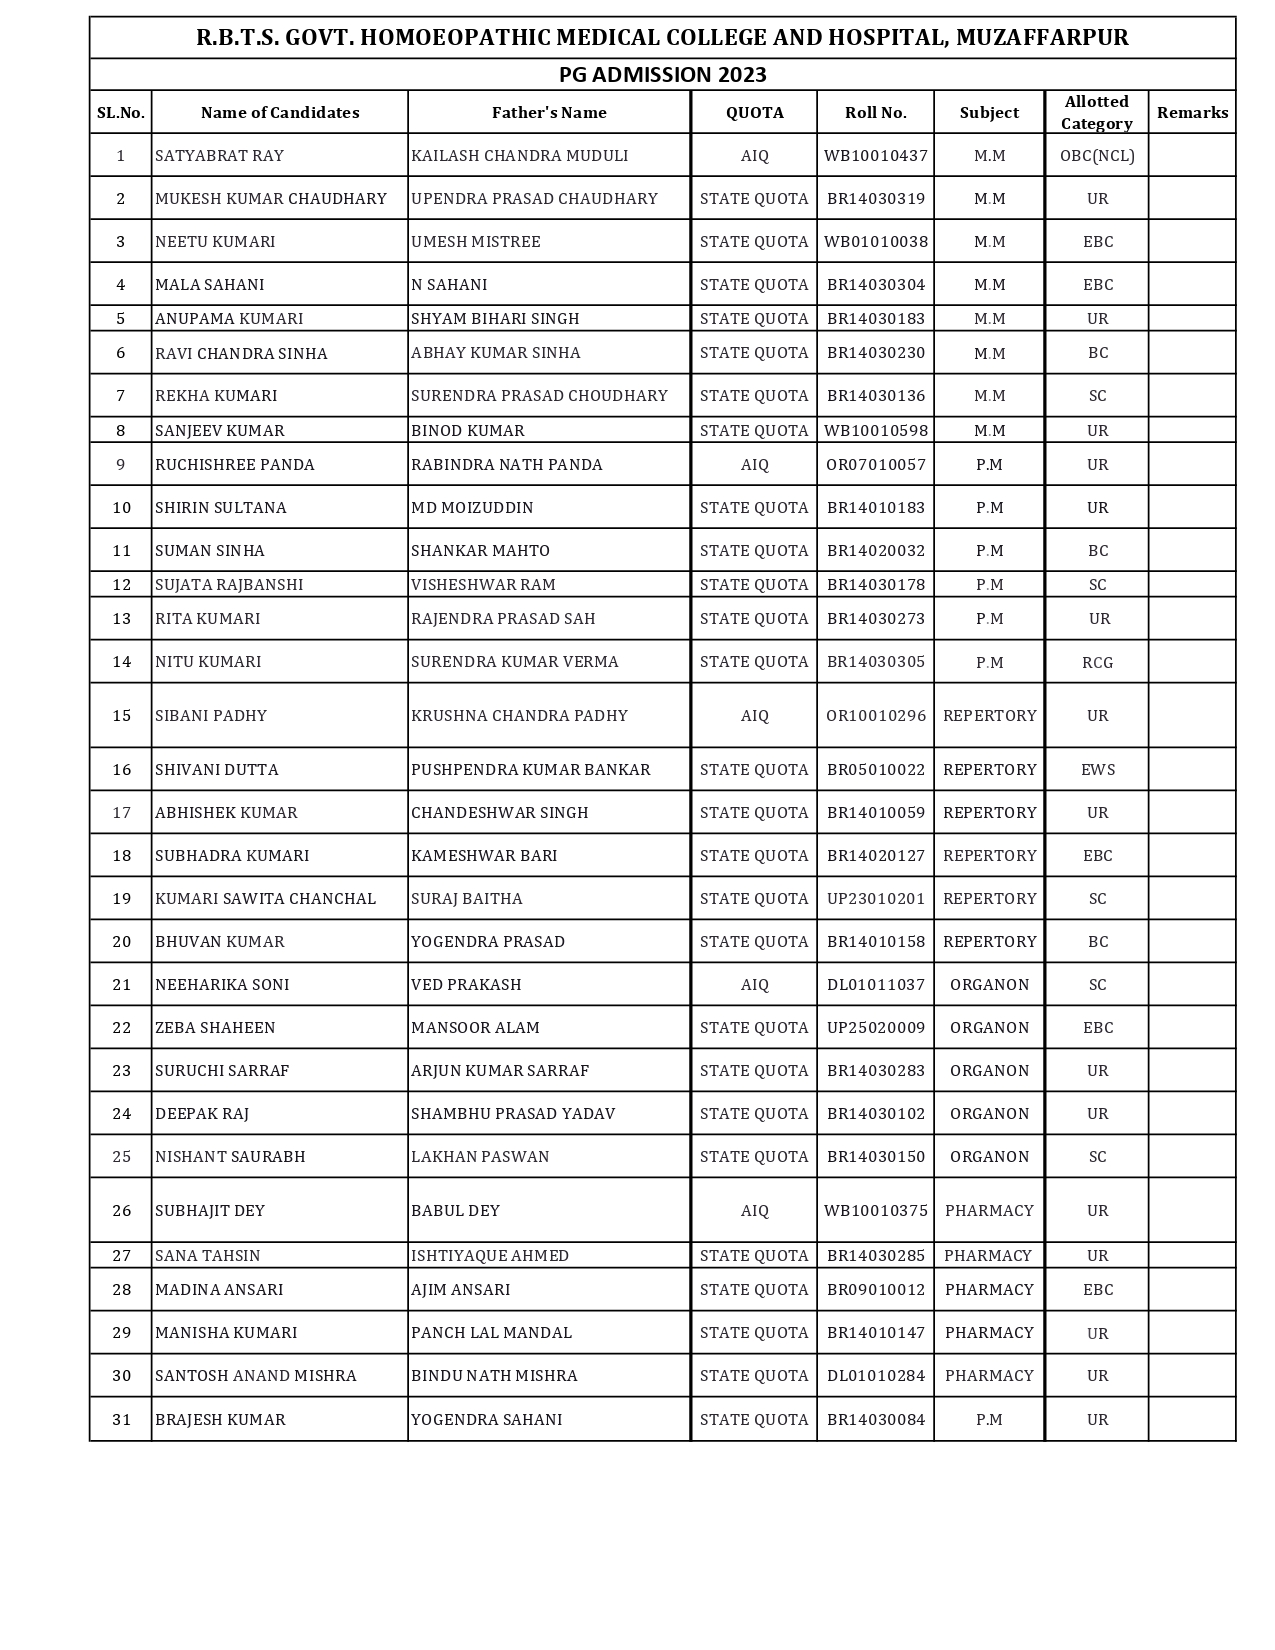 List-of-PG-Students-Batch-2023